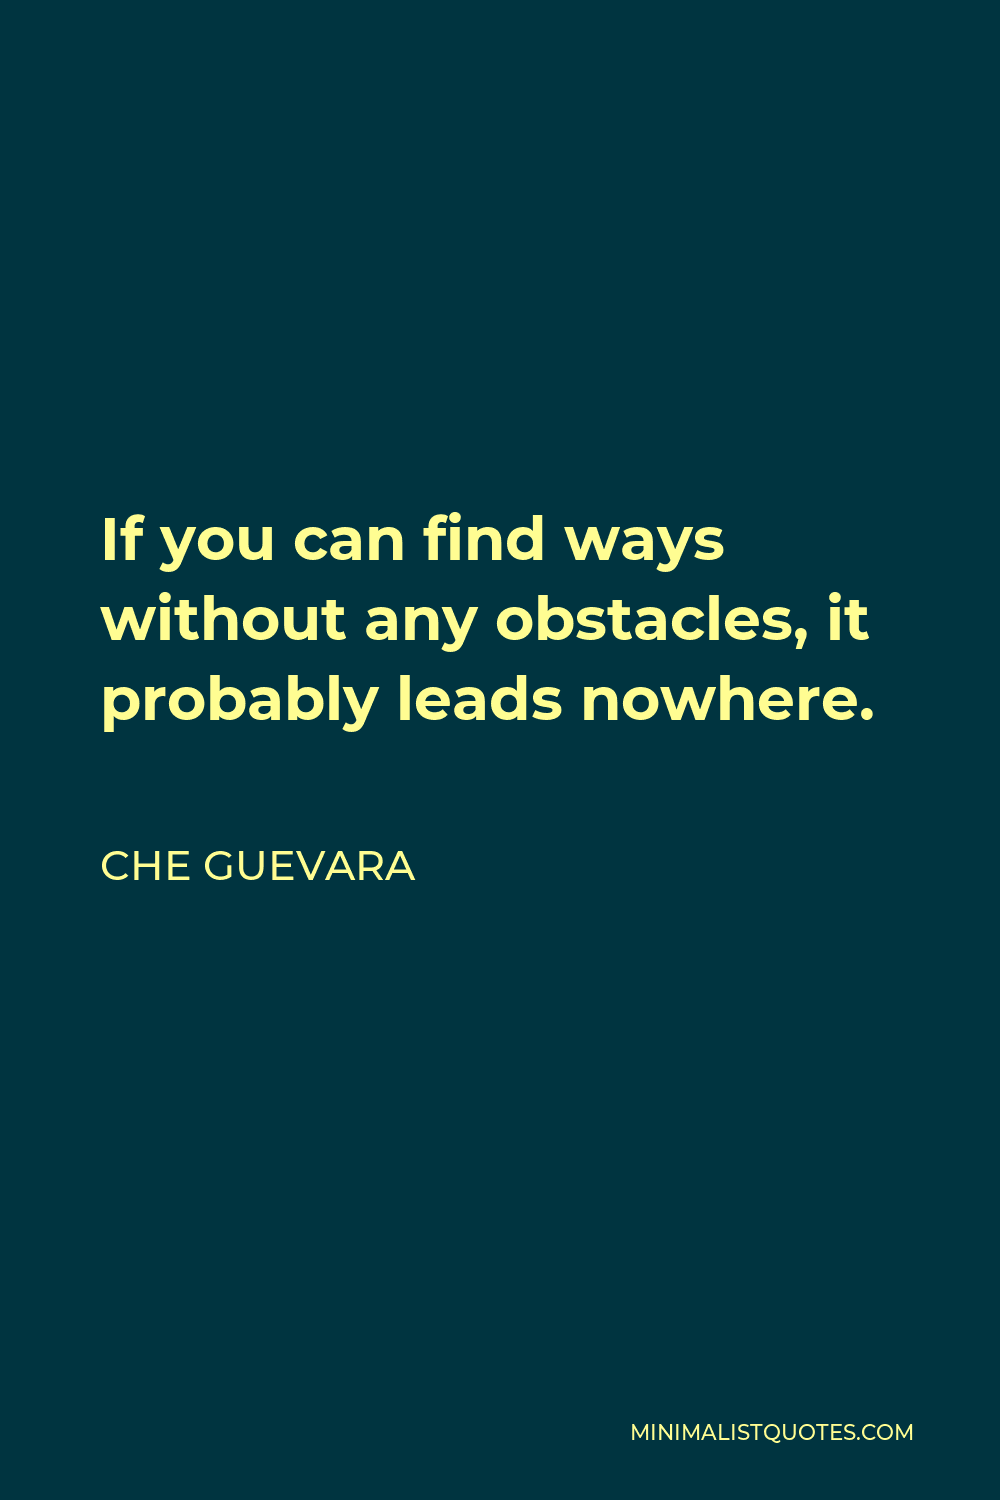 Che Guevara Quote - If you can find ways without any obstacles, it probably leads nowhere.